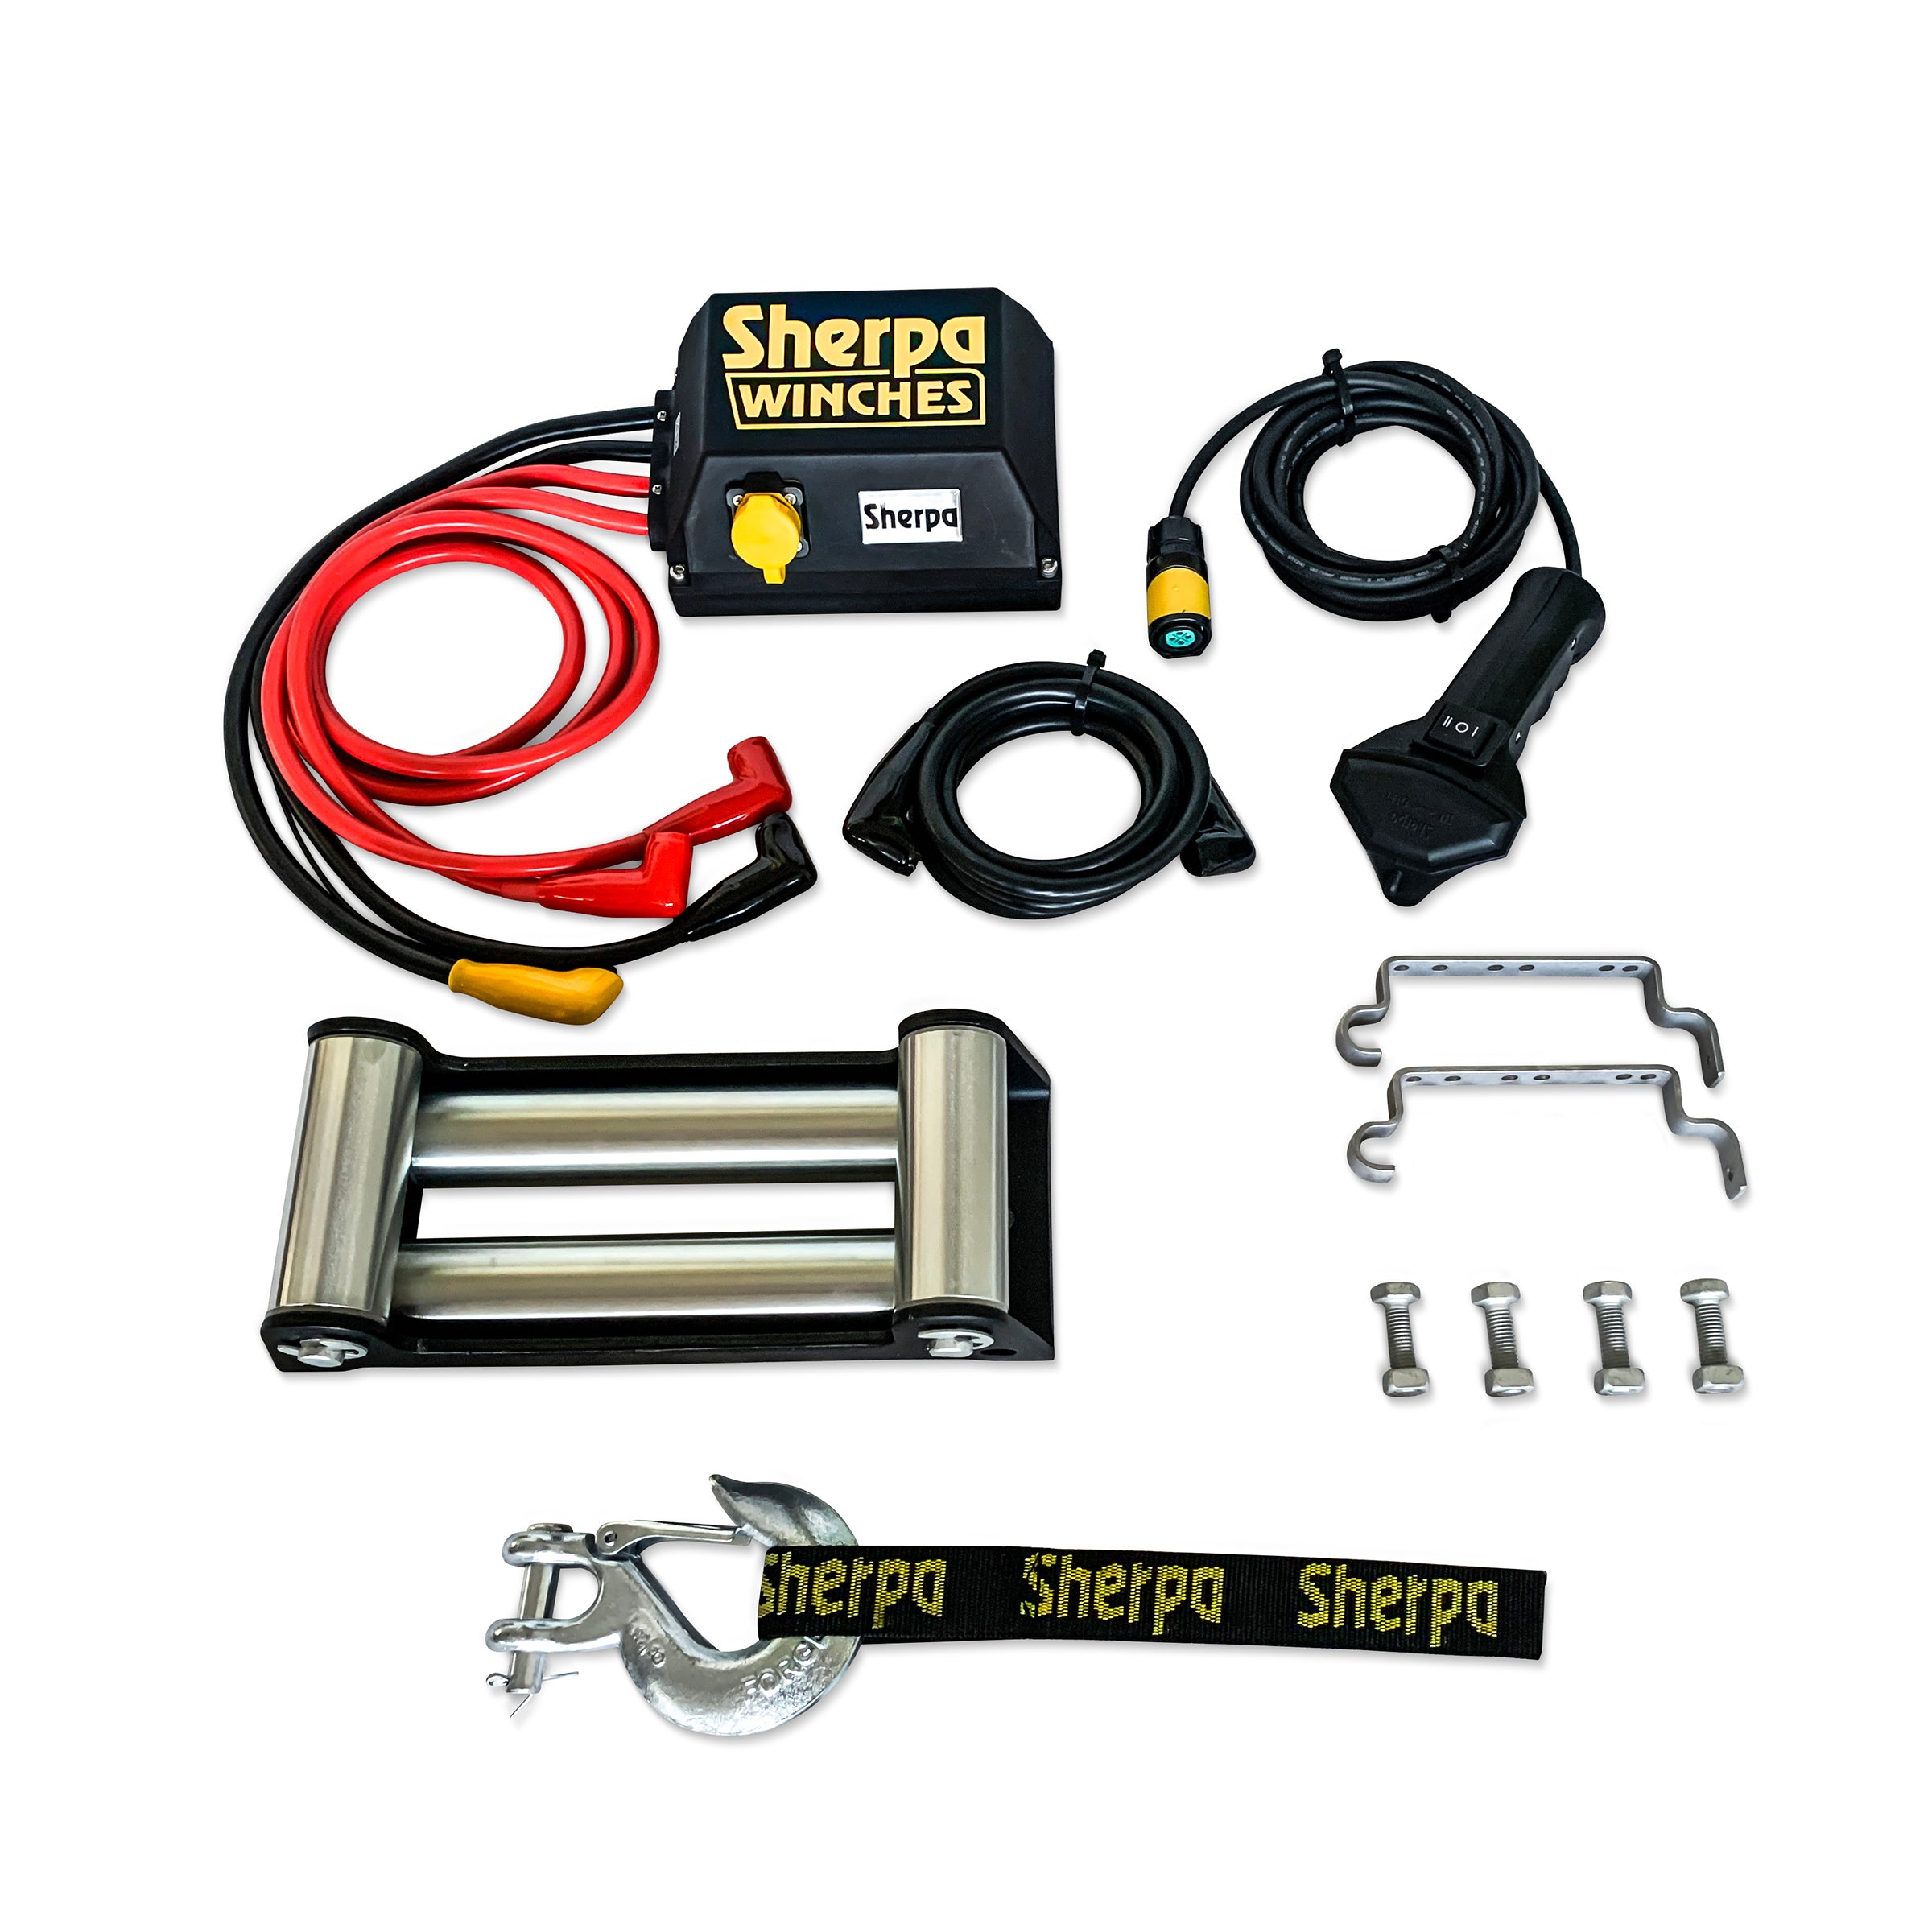 Sherpa cable winch accessories kit